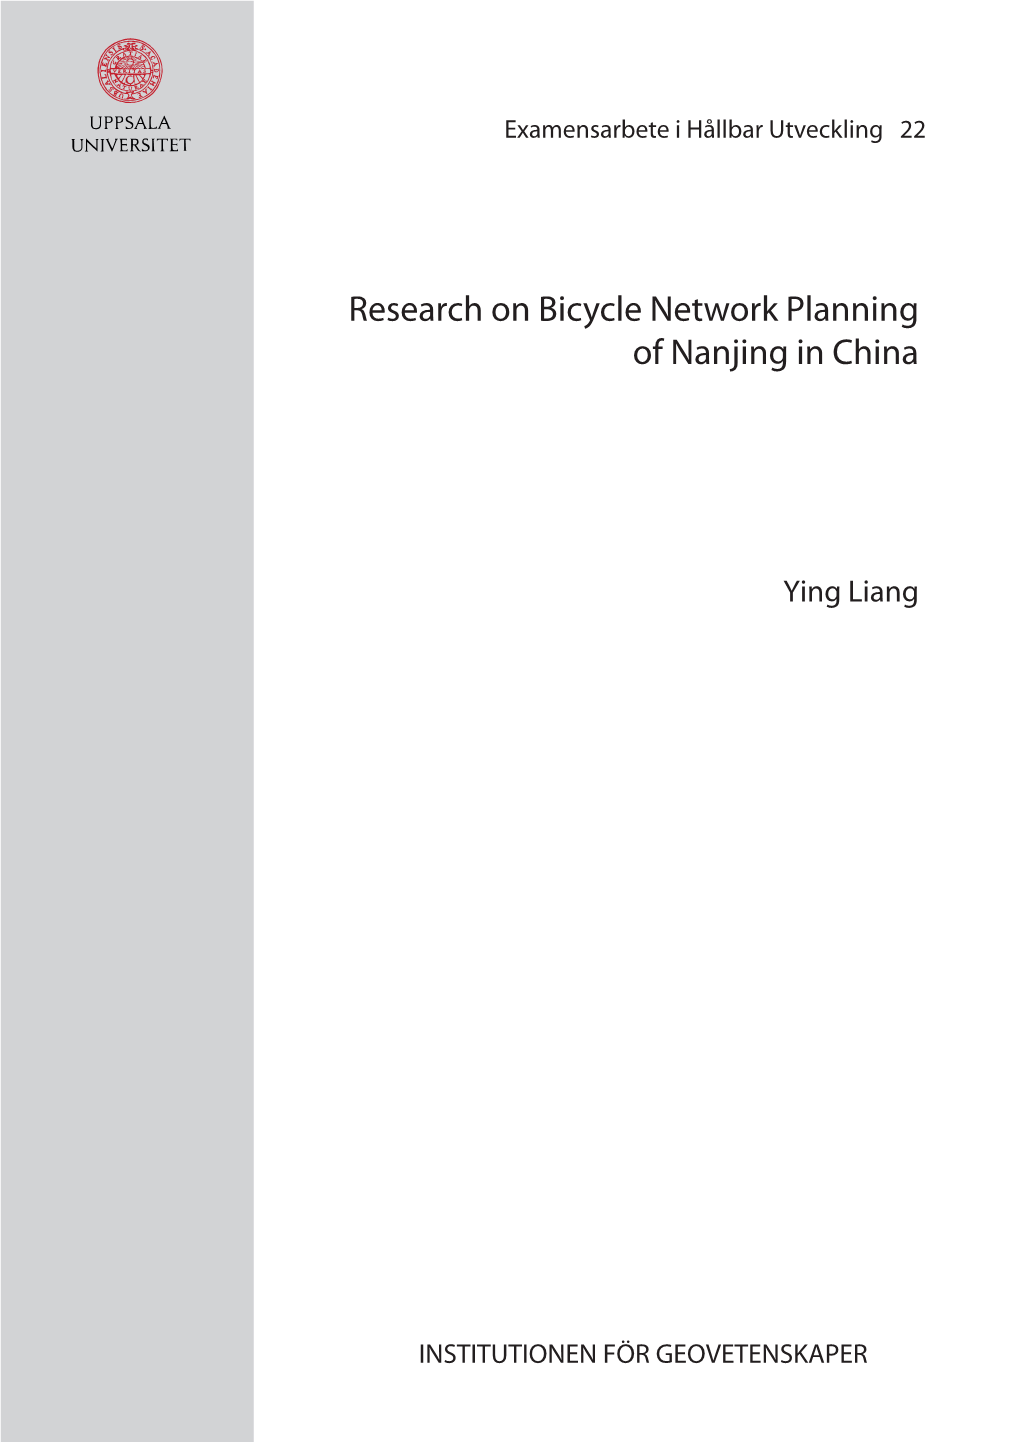 Research on Bicycle Network Planning of Nanjing in China